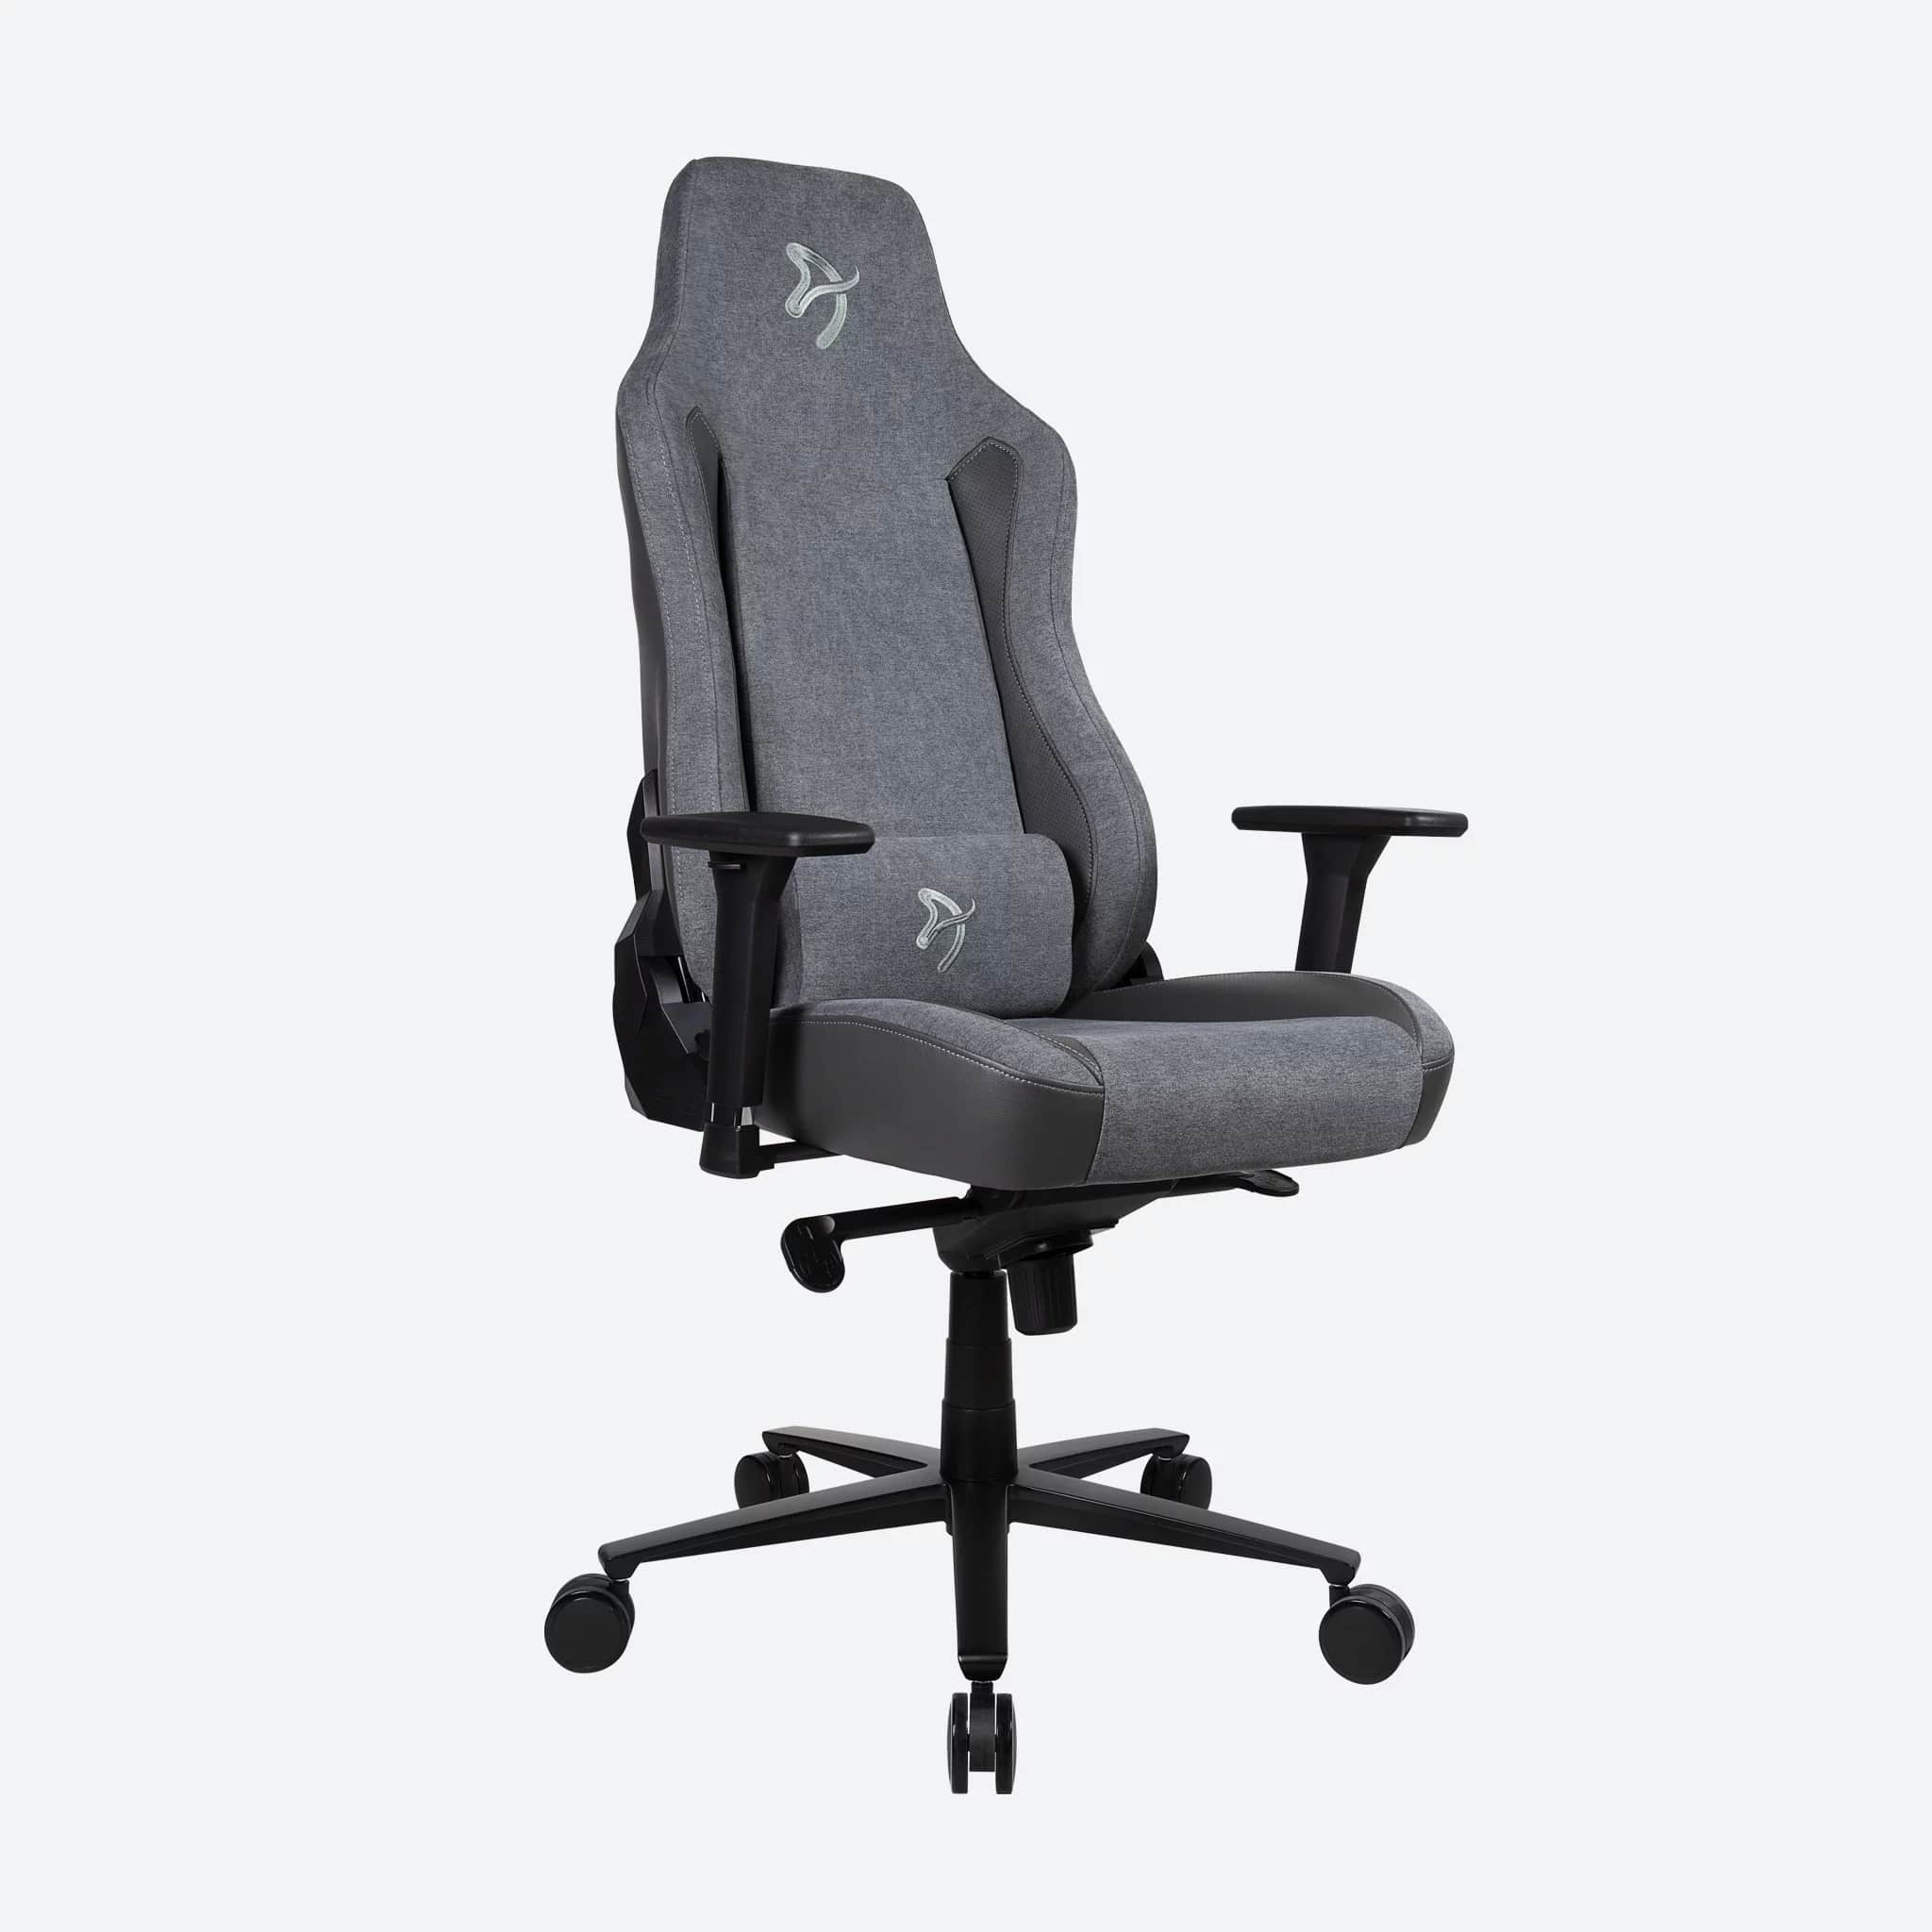 Arozzi PU Leather Gaming Chair with Armrests 3D Fabric High Level Hybrid Furniture - Gray